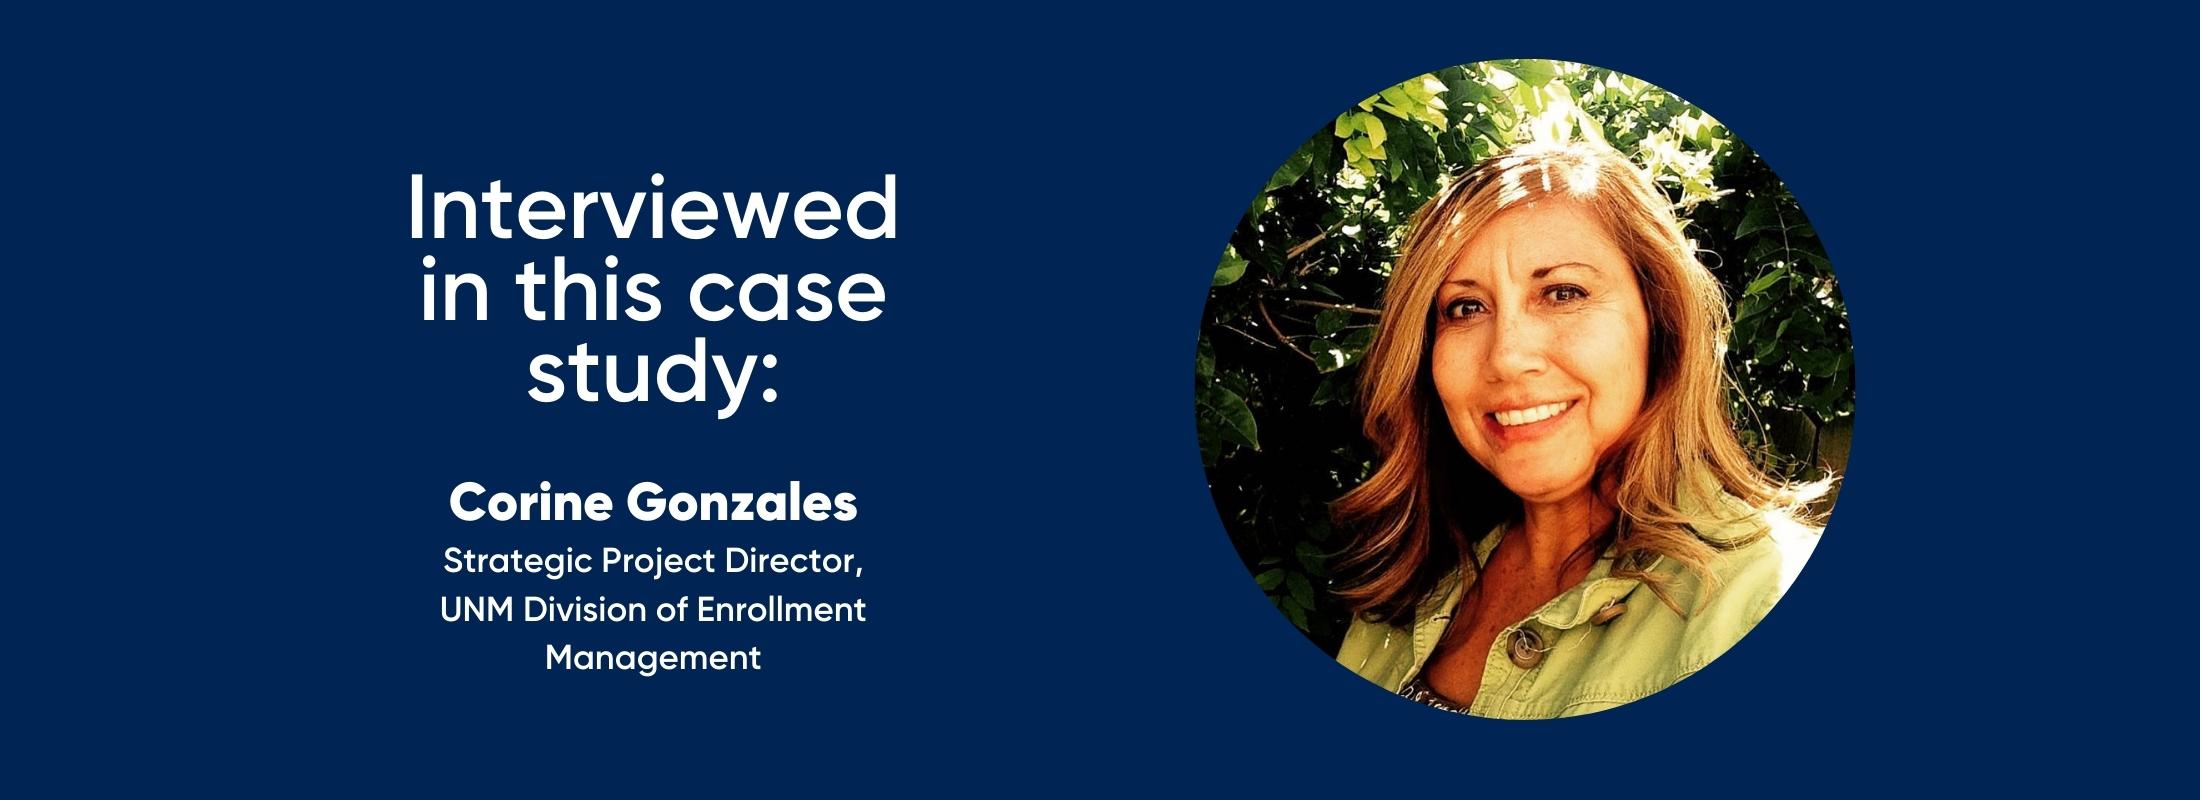 interviewed in this case study: Corine Gonzales, Strategic Project Manager, UNM Division of Enrollment Management